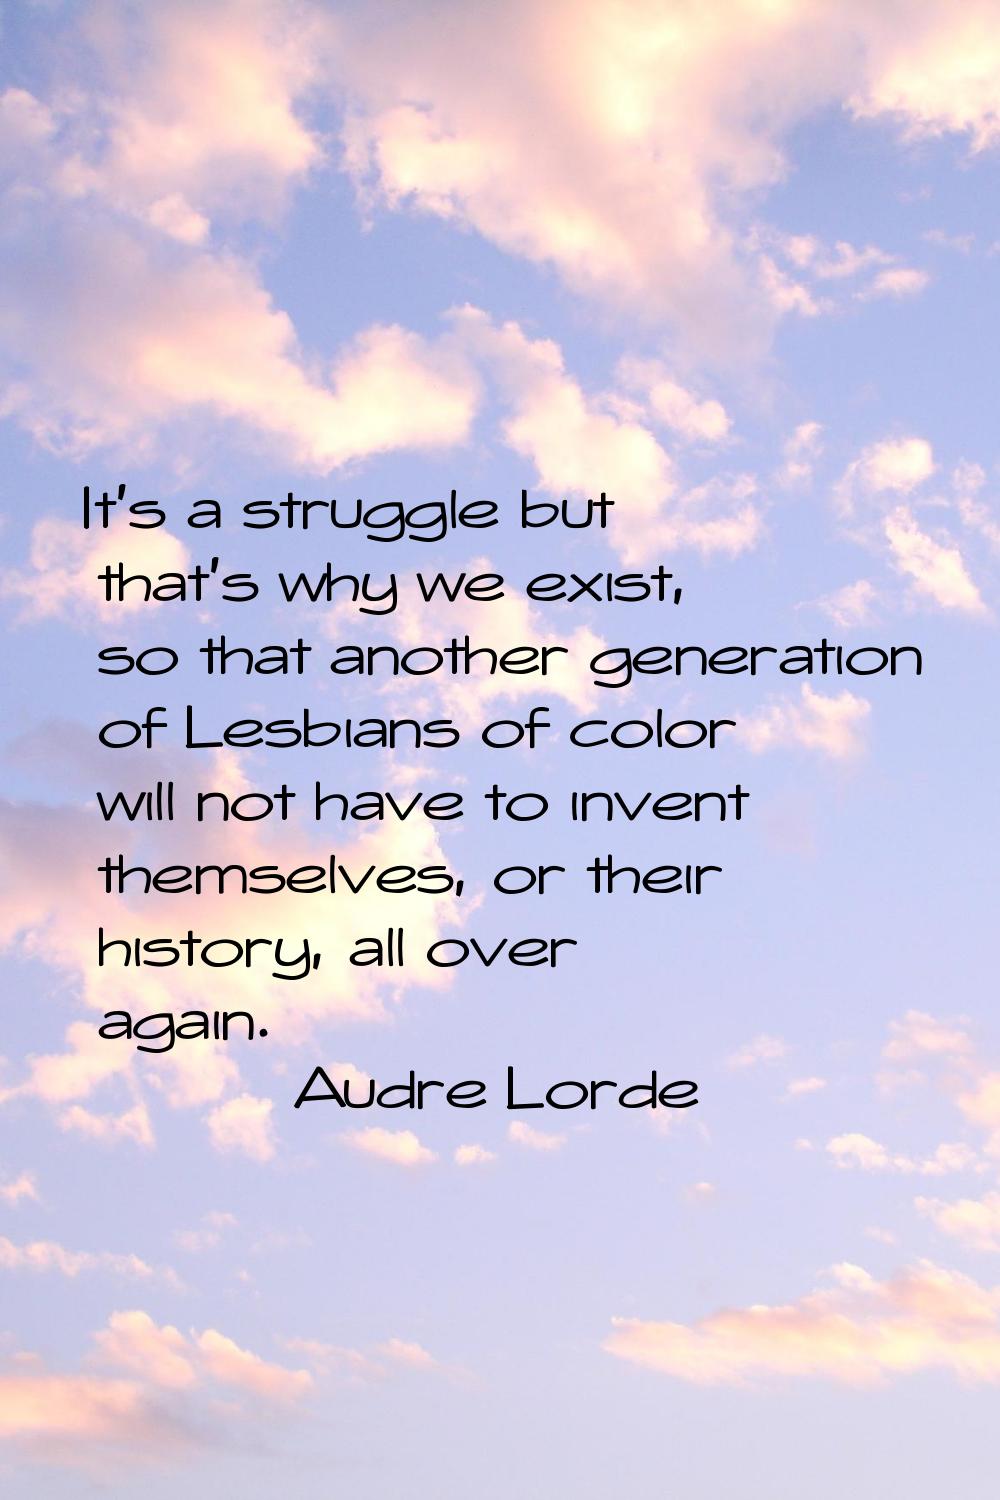 It's a struggle but that's why we exist, so that another generation of Lesbians of color will not h